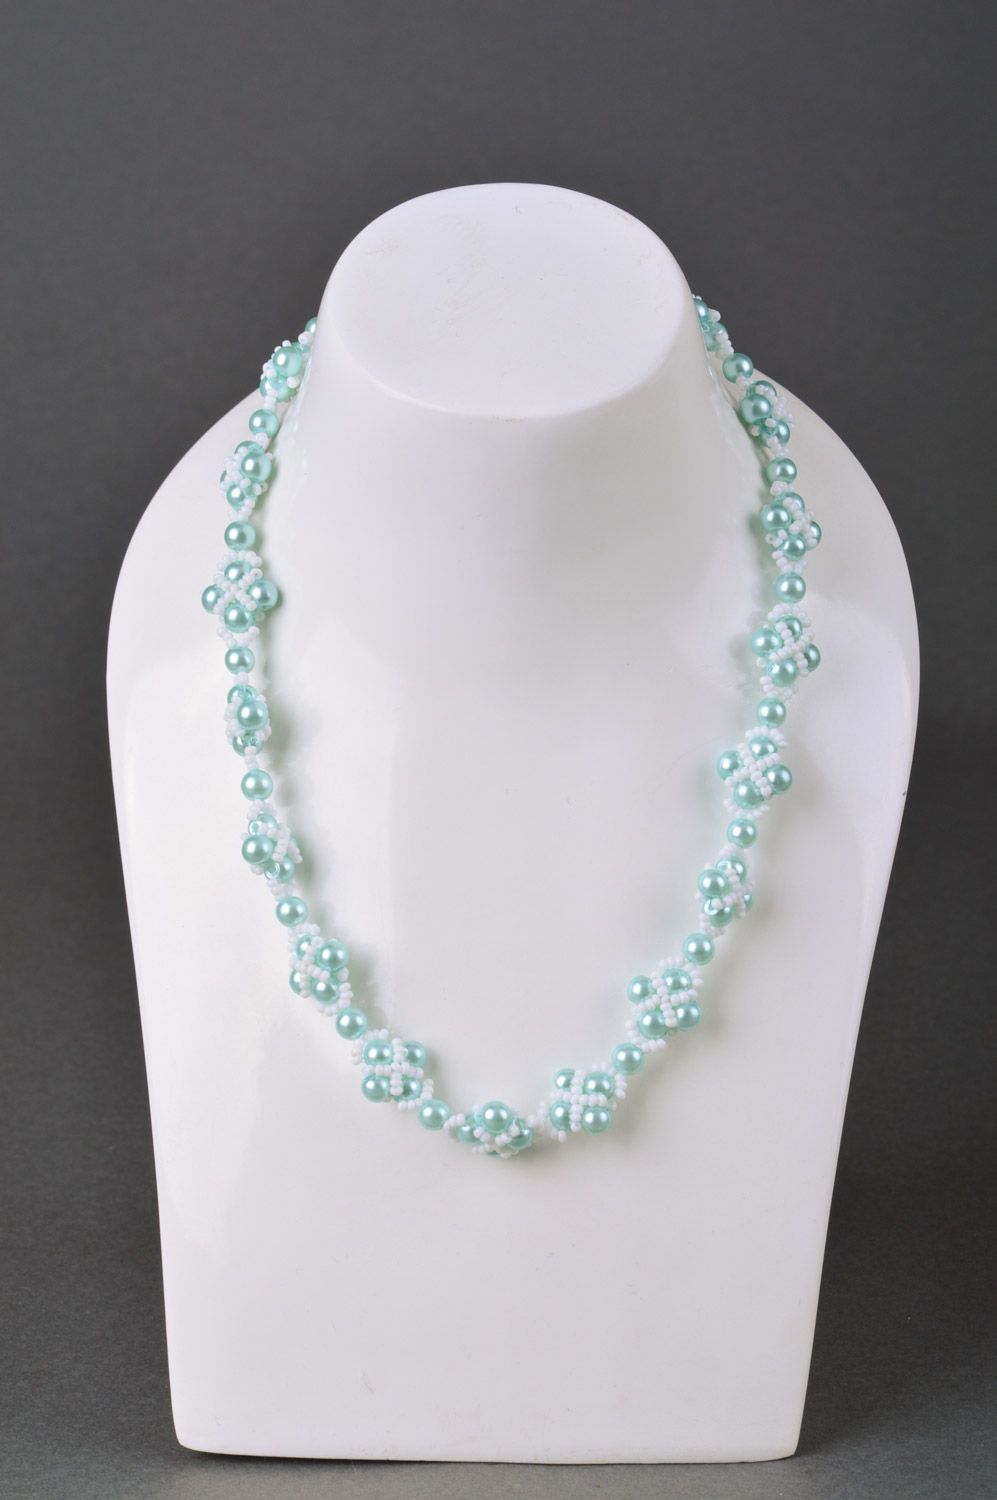 Handmade tender necklace woven of white and blue beads of different sizes photo 1